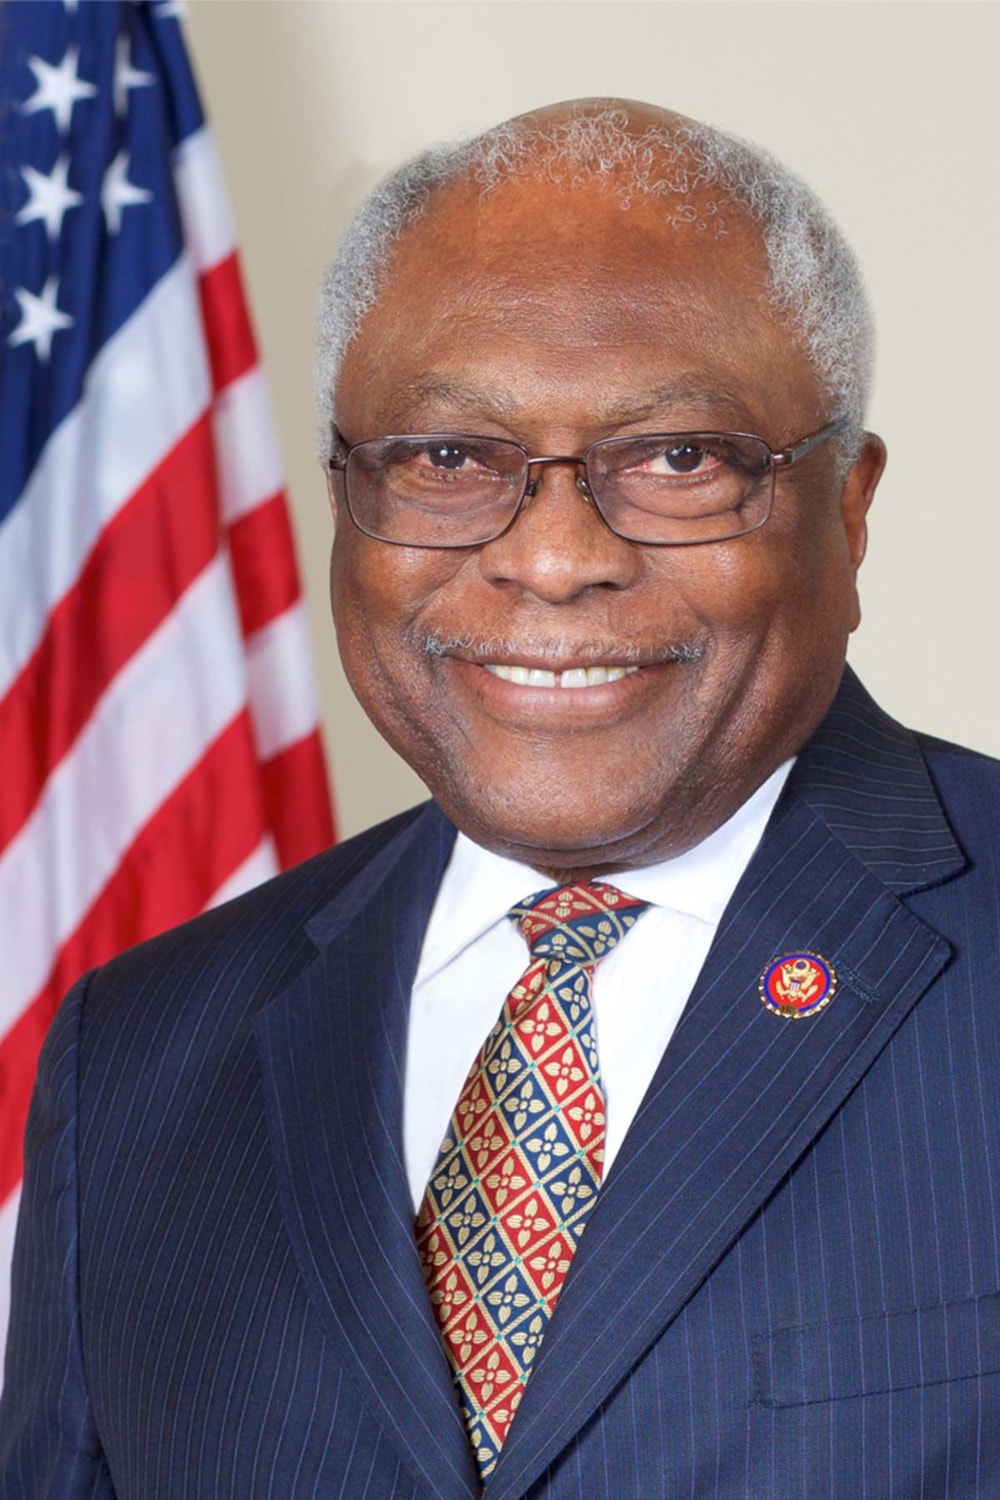 James E. Clyburn, Majority Whip, in the United States House of Representatives to speak at Michigan State University’s Governor Jim Blanchard Public Service Forum